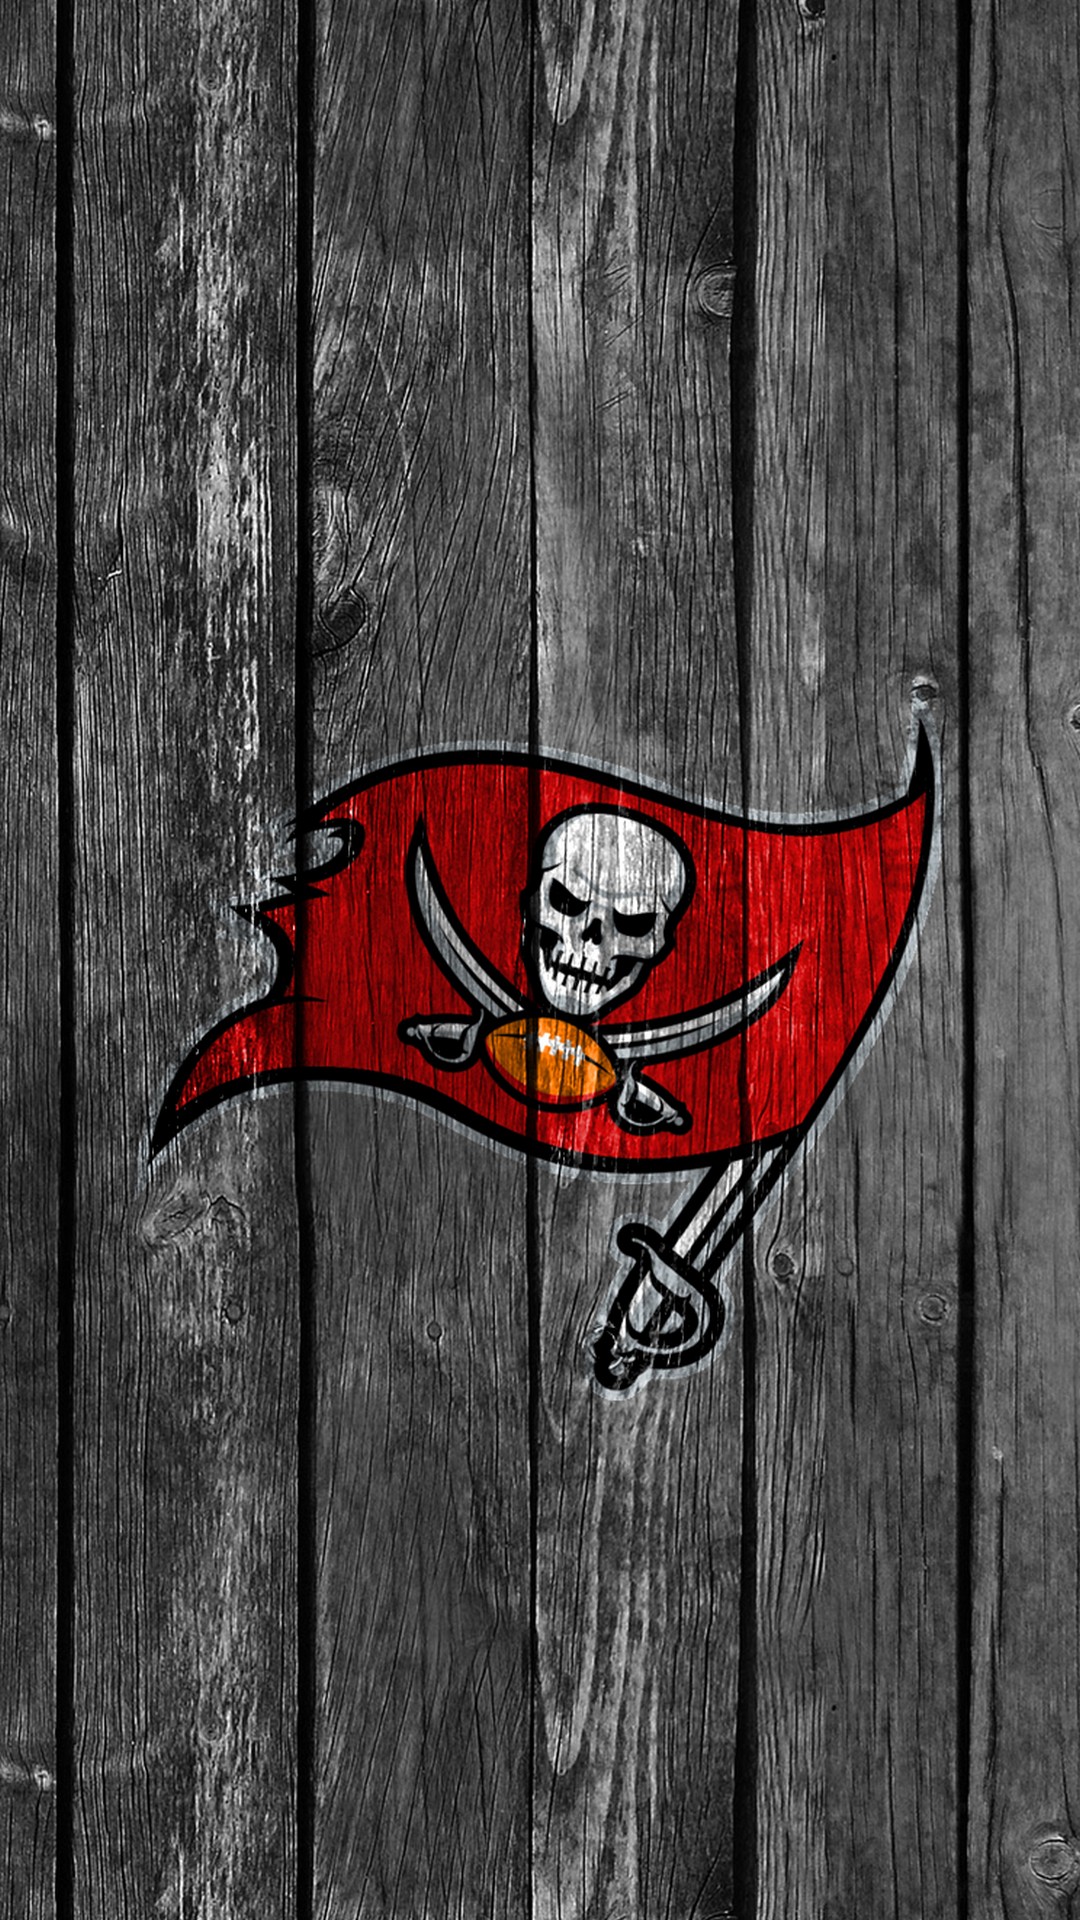 Tampa Bay Buccaneers Logo iPhone Wallpaper High Quality with high-resolution 1080x1920 pixel. Donwload and set as wallpaper for your iPhone X, iPhone XS home screen backgrounds, XS Max, XR, iPhone8 lock screen wallpaper, iPhone 7, 6, SE and other mobile devices